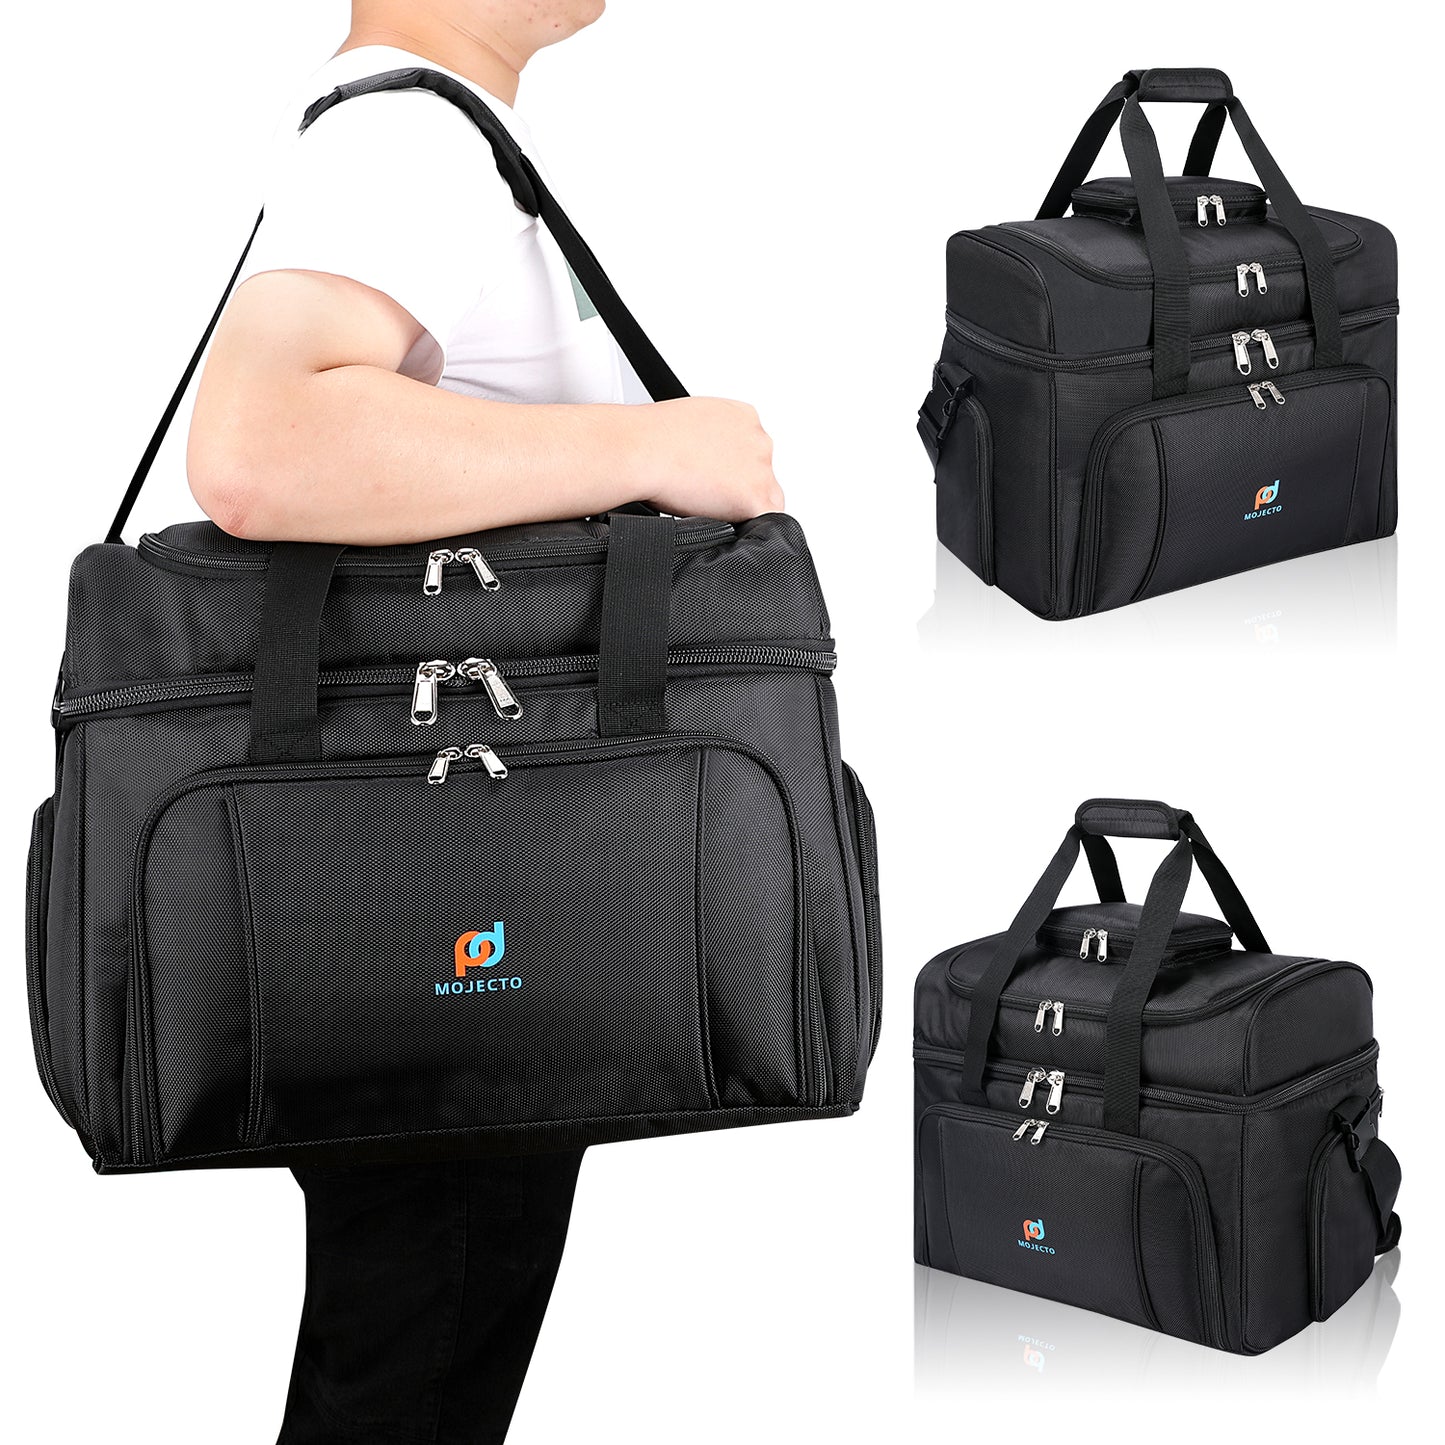 XXX-Large Cooler Bag (17x14x10 In). Two Insulated Compartment, Heavy Duty Fabric, Durable Zippers.